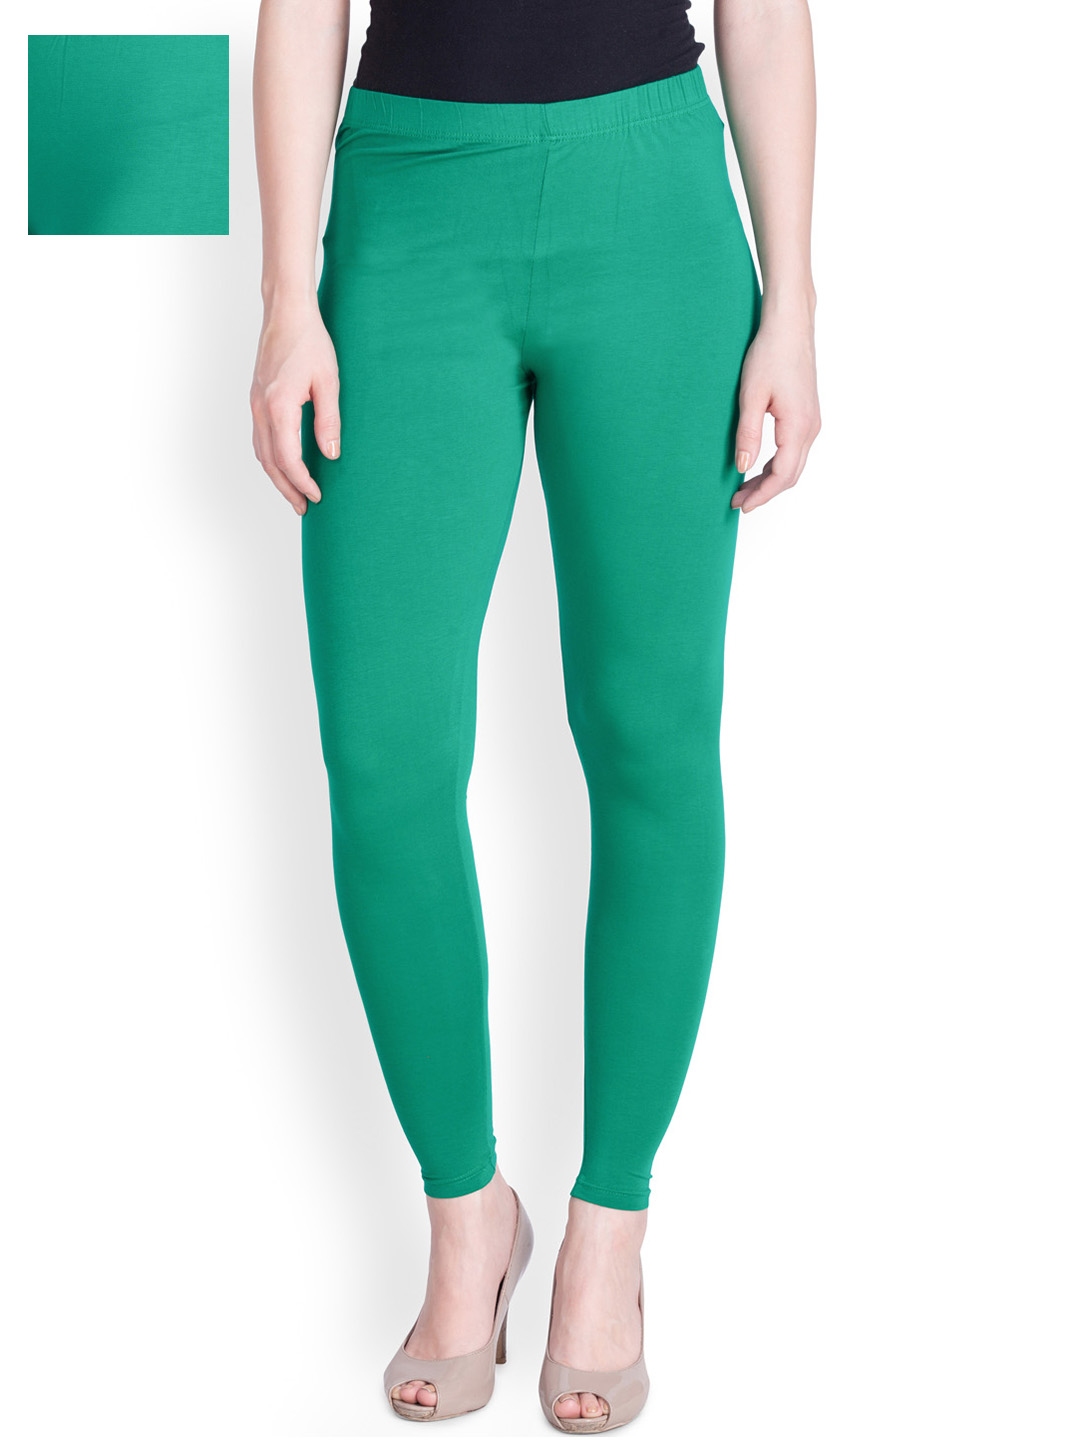 Lux Lyra Ankle Length Leggings Prices Chart